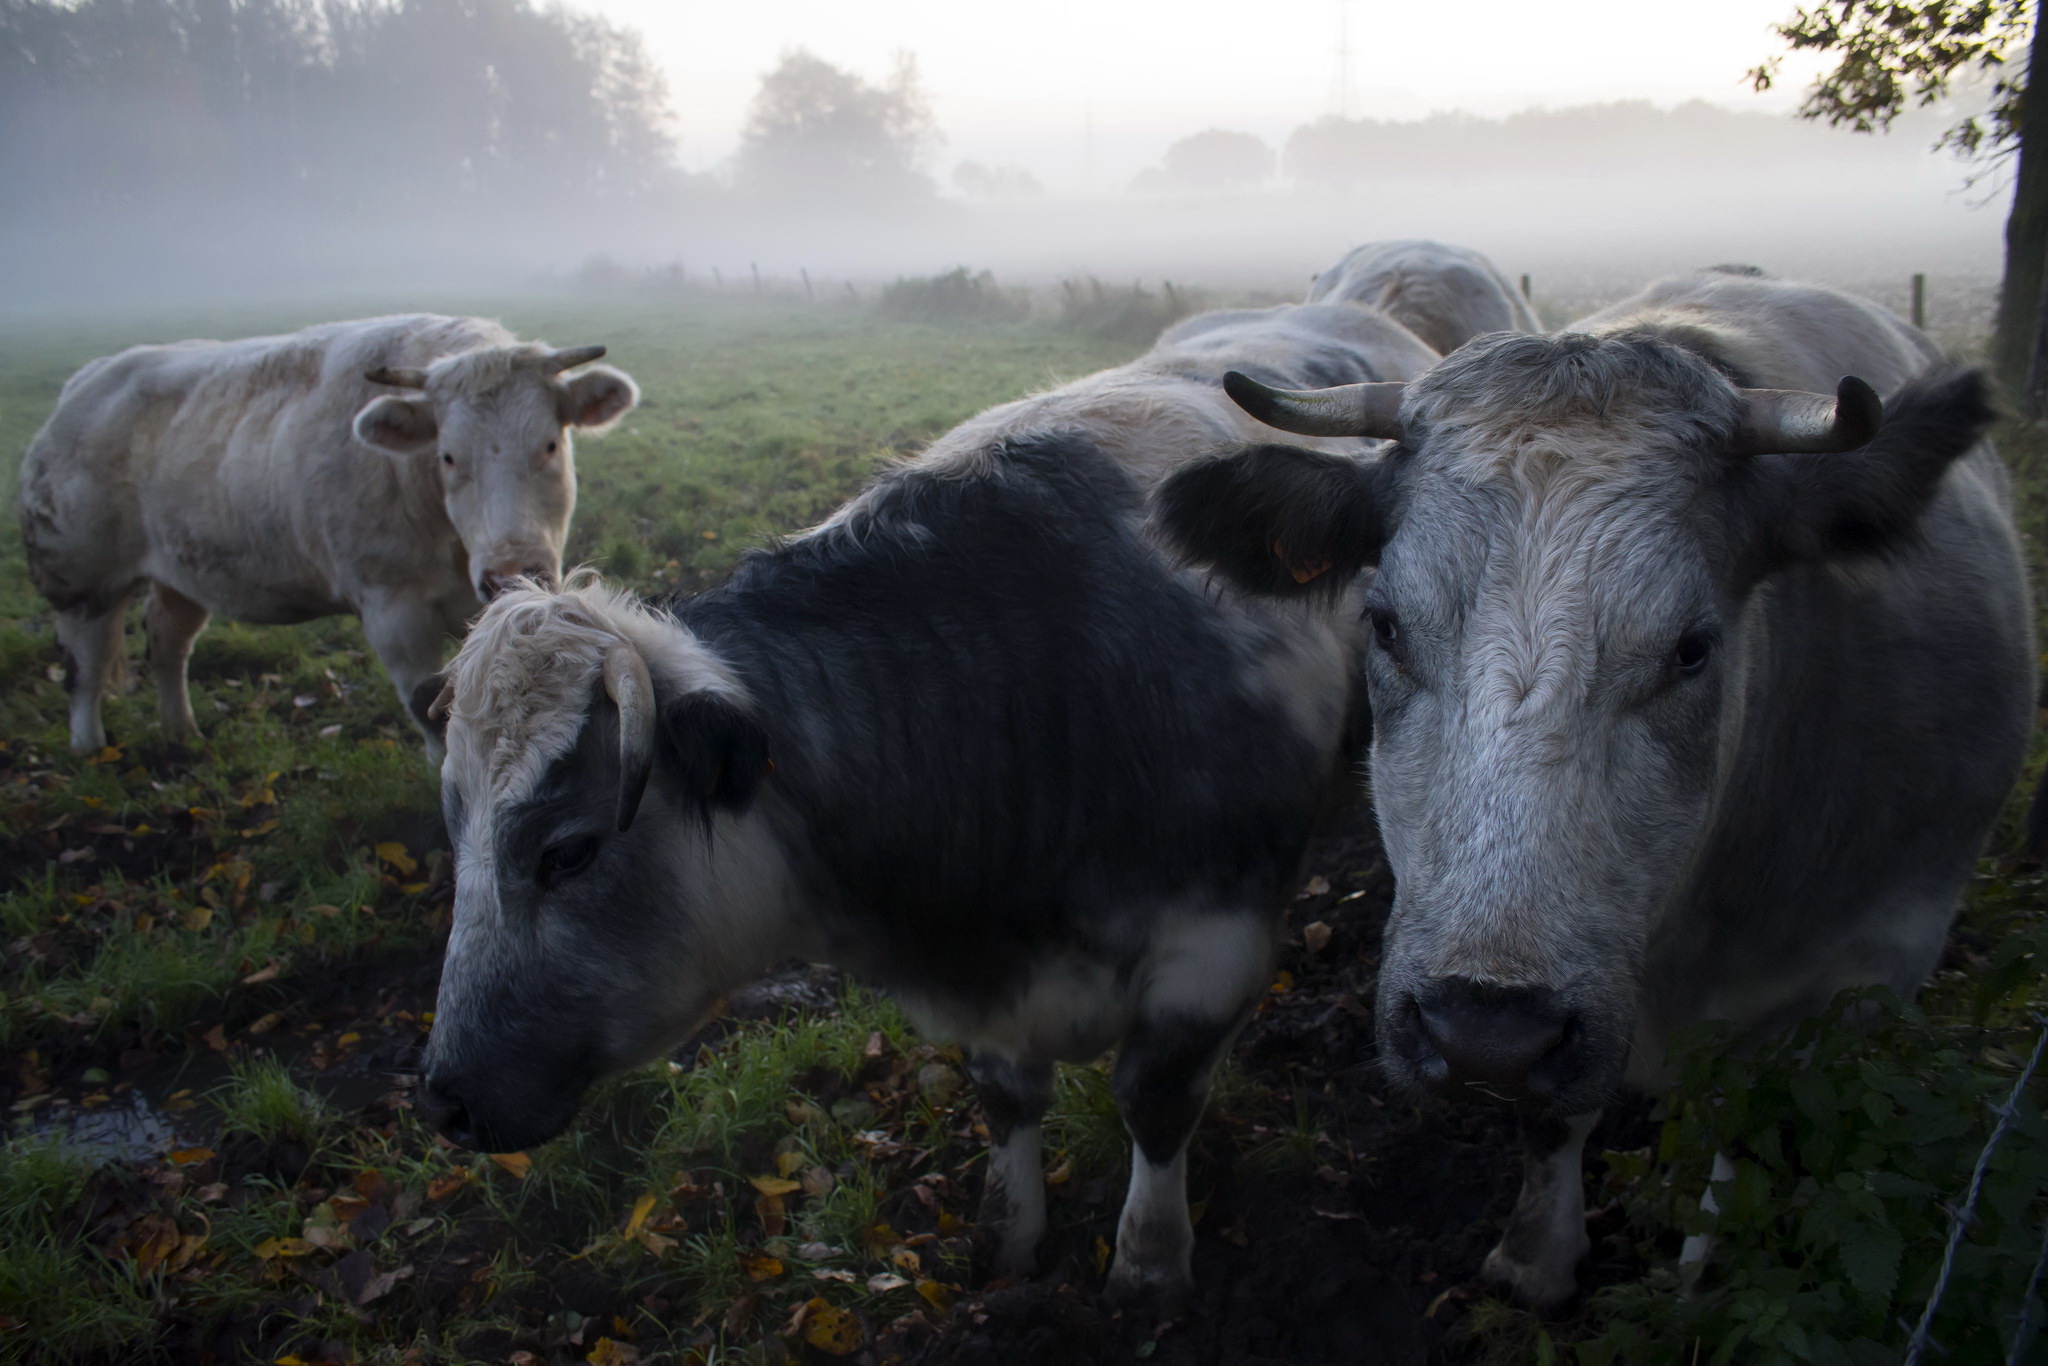 General 2048x1366 animals cow outdoors mist